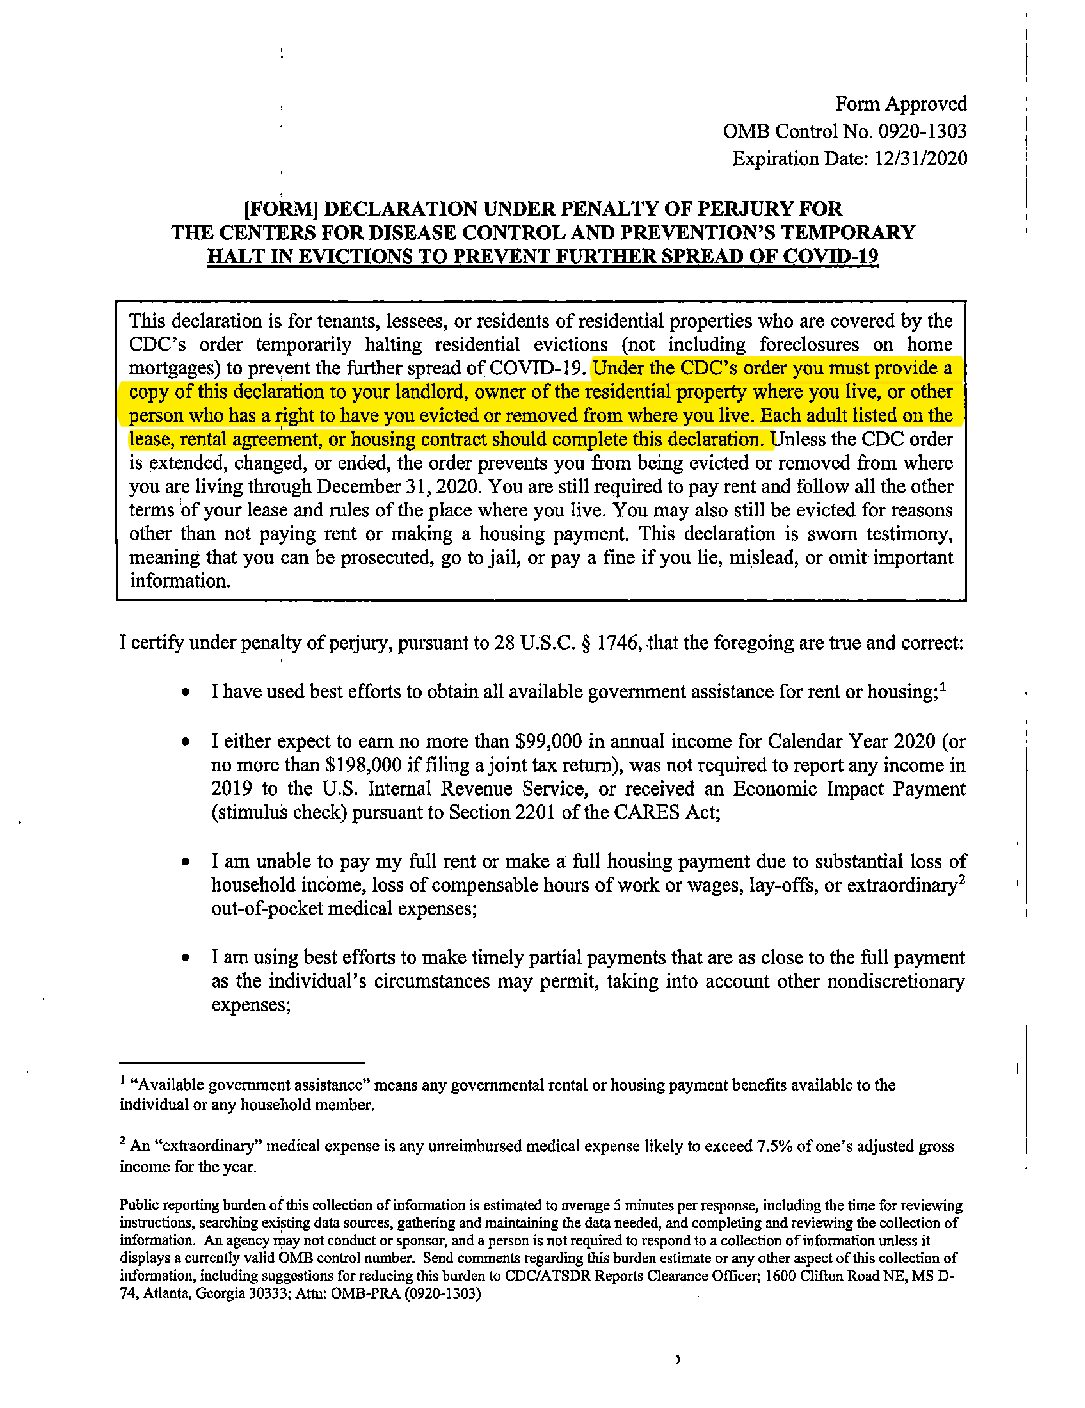 preview image of first page CDC Declaration -Eviction